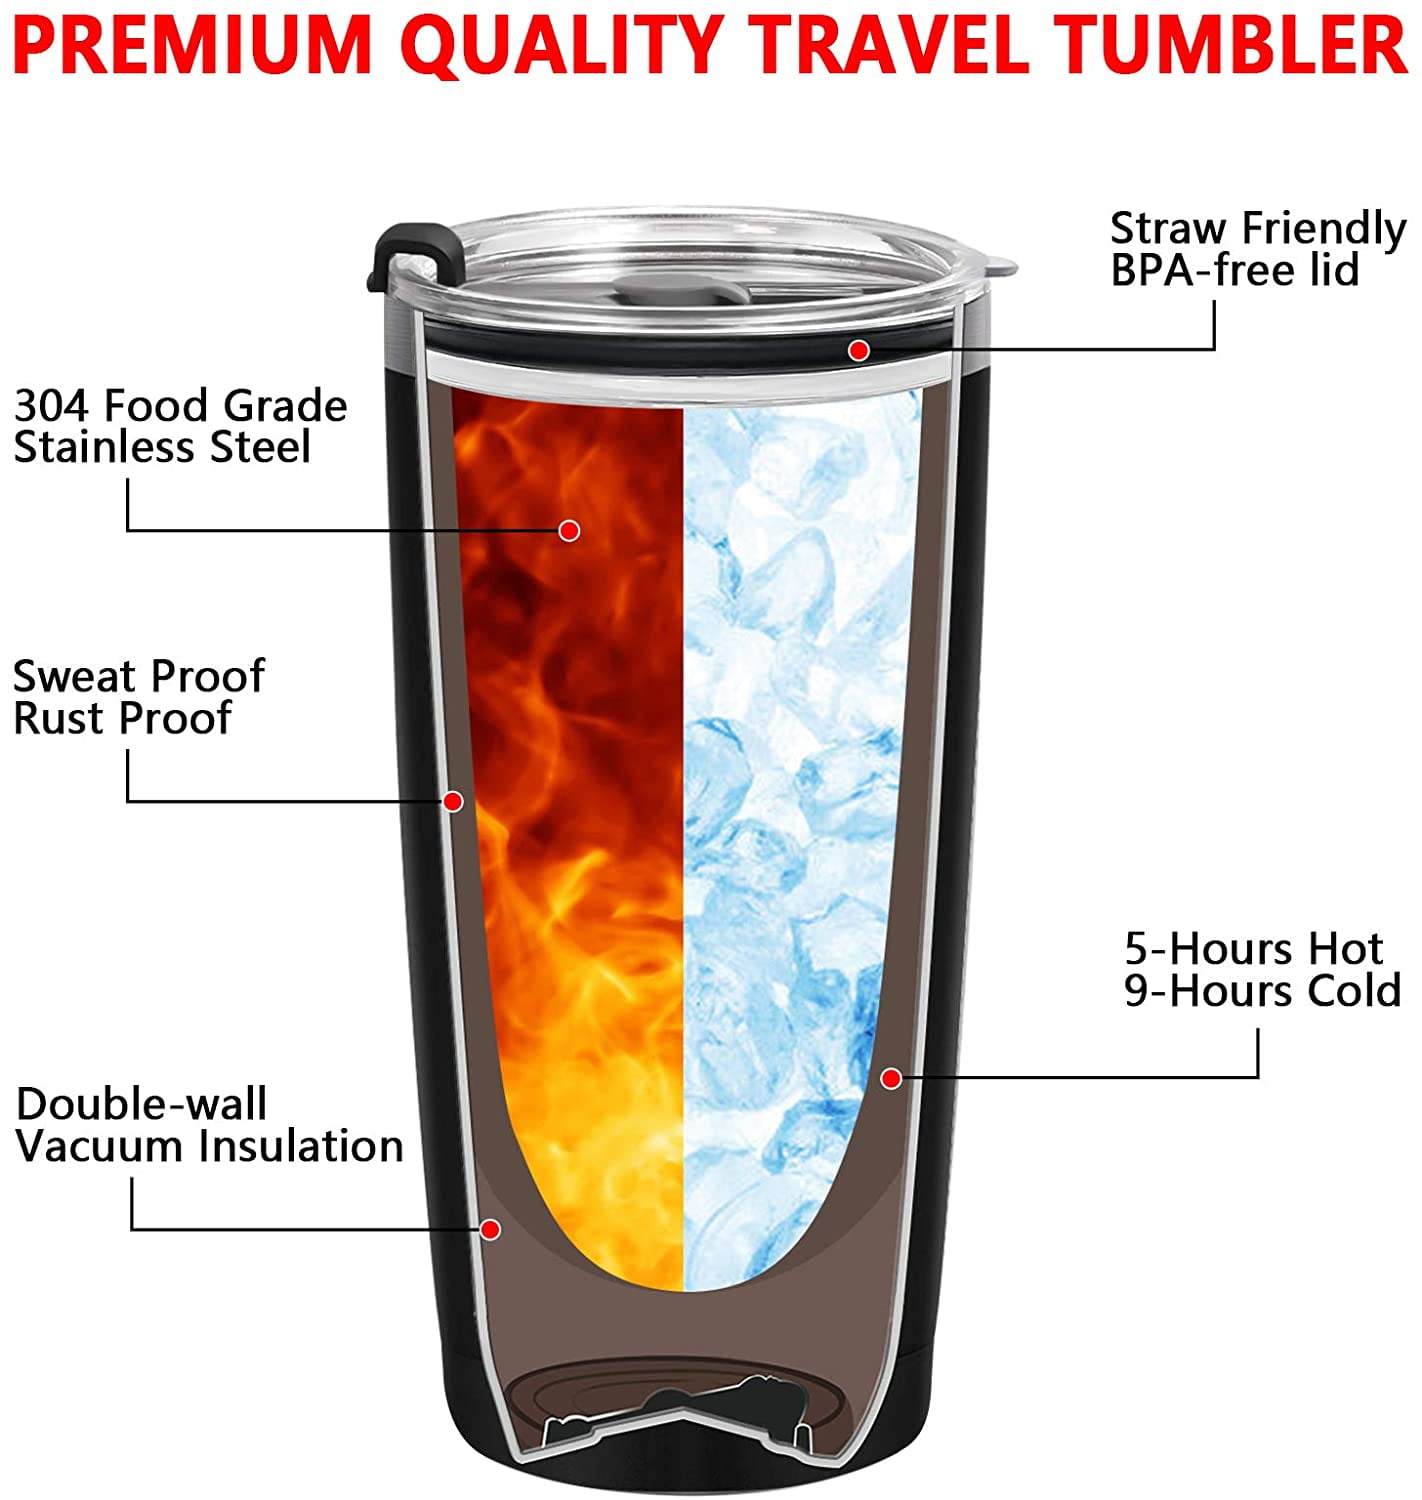 Adventure Design Thermoformed Cup- 500 Cup/Lid/Straw (500 units)